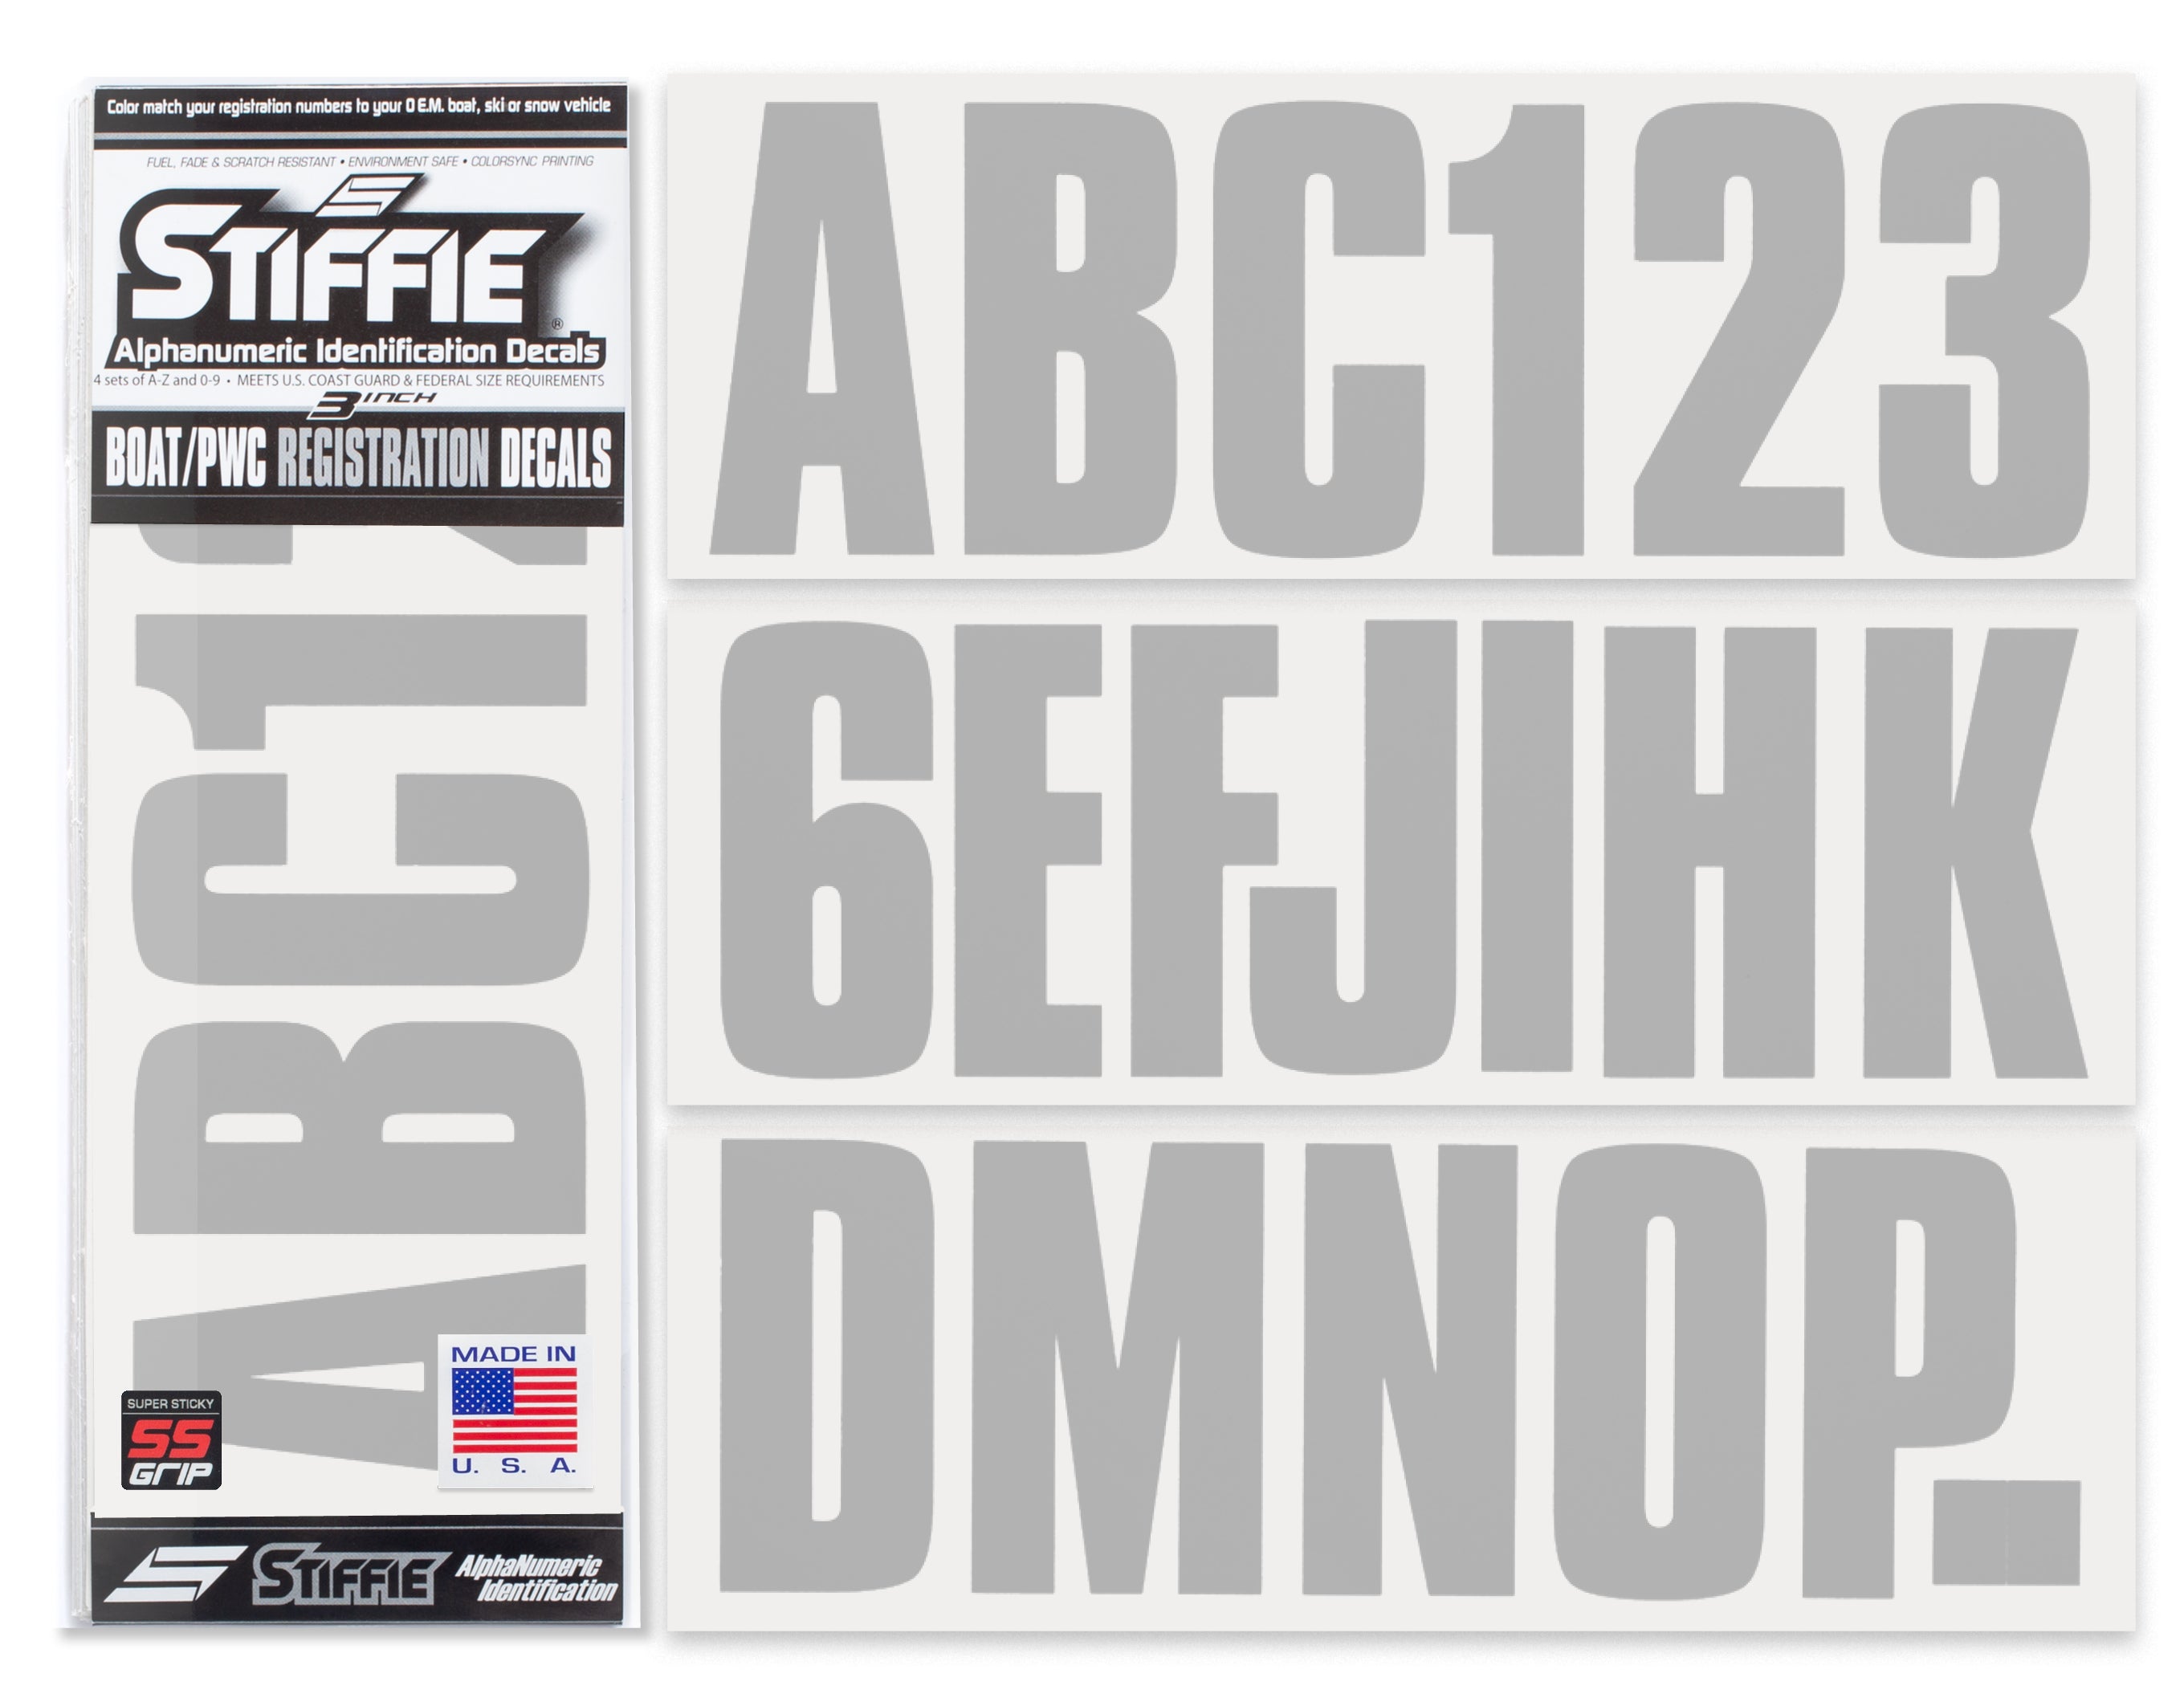 STIFFIE Uniline Silver Super Sticky 3" Alpha Numeric Registration Identification Numbers Stickers Decals for Sea-Doo Spark, Inflatable Boats, Ribs, Hypalon/PVC, PWC and Boats